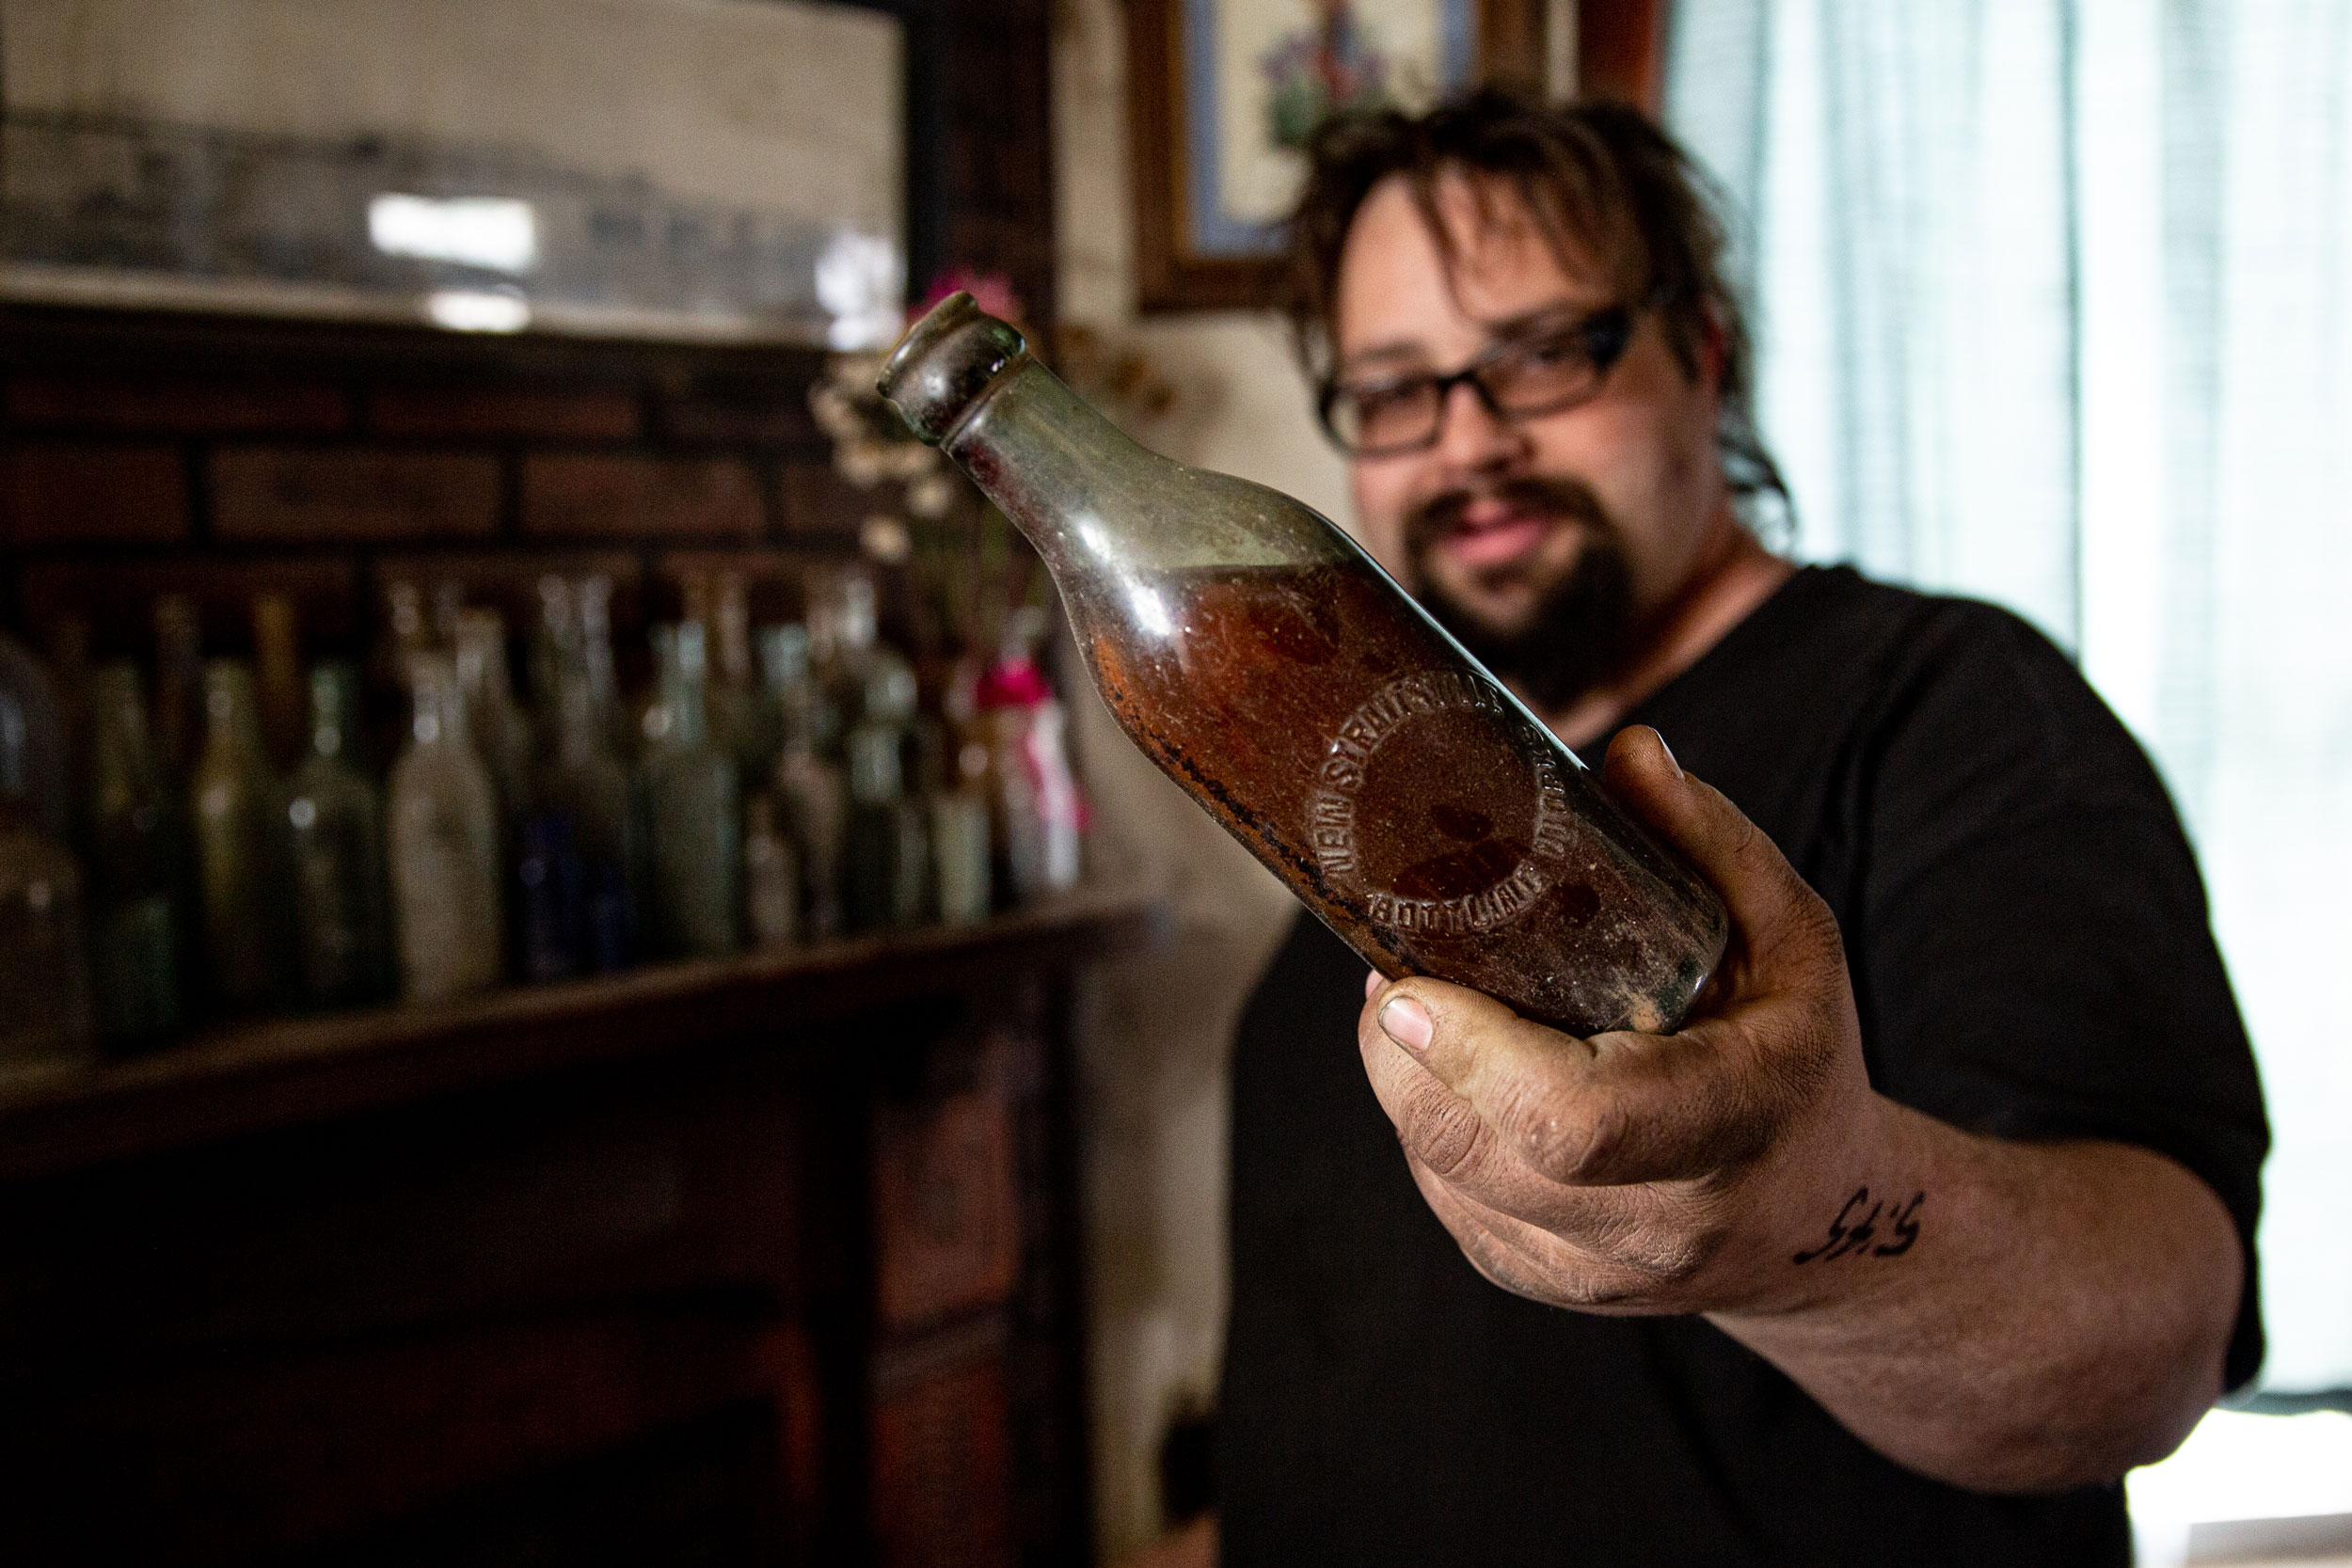  Cam Blosser holds up a bottle full of soda from the early 1900s preserved due to a broken of cork. Cam found the bottle in the creek behind his home in New Straightsville. Talking to “old timers” in the area, Cam learned that before refrigerators, bottles of soda like this were put in the creek to cool off. He surmises this one was forgotten in the creek and was washed down stream and buried until he discovered it.  